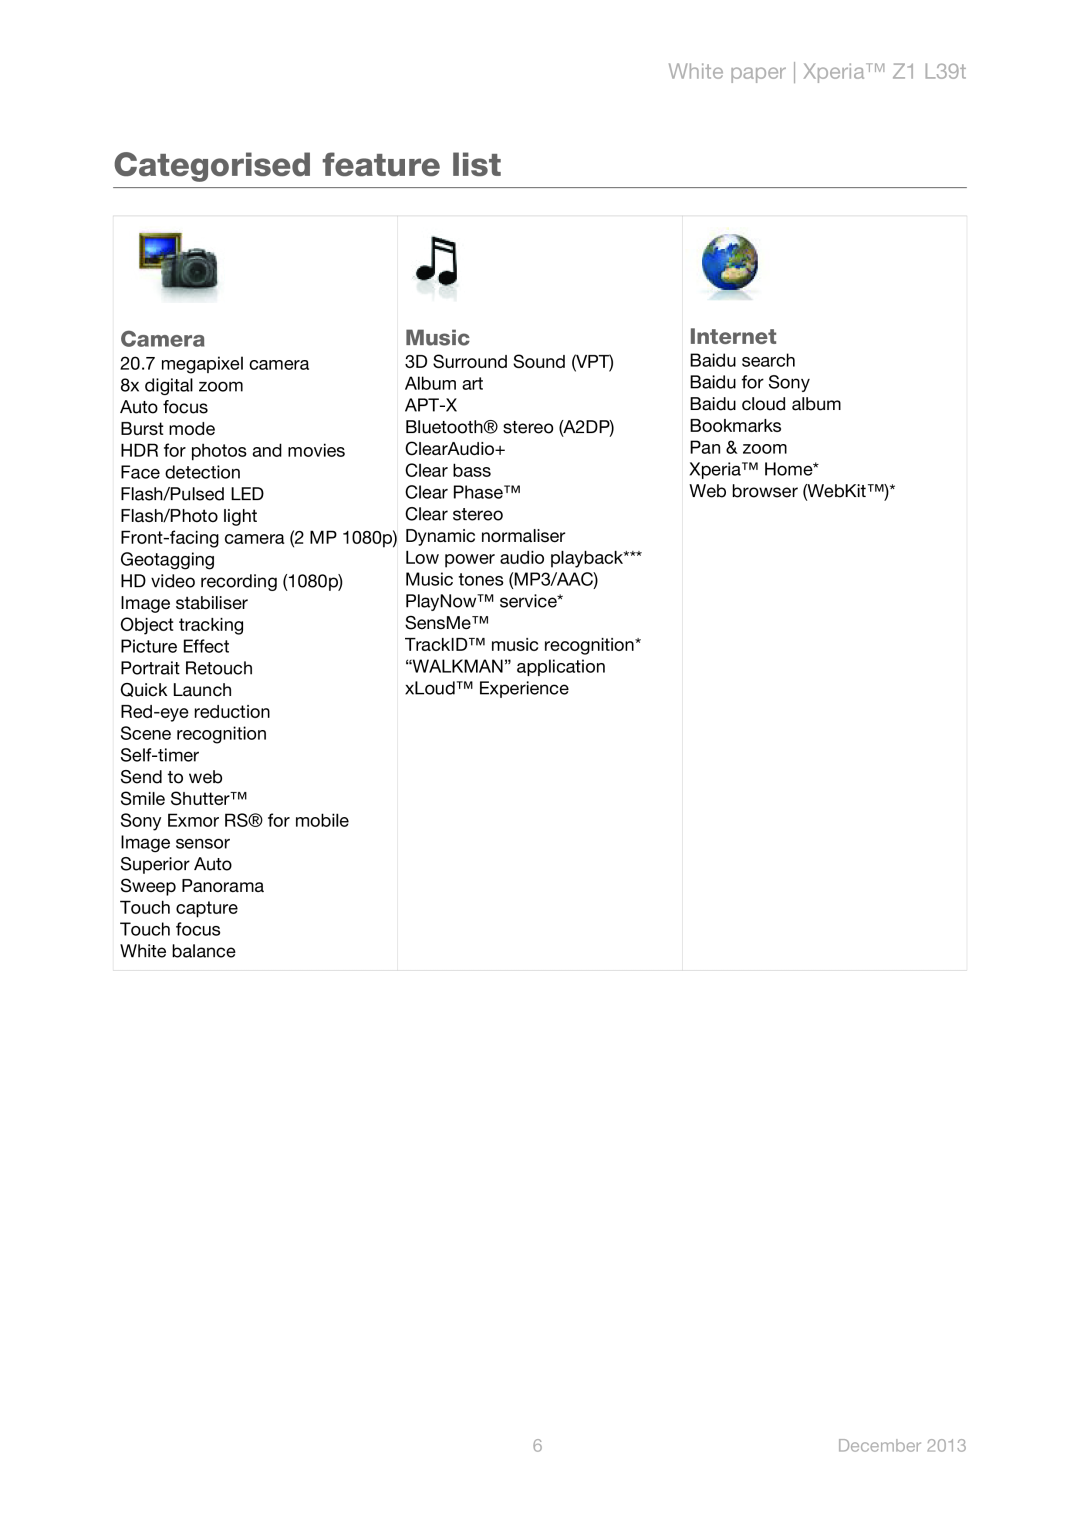 Sony manual Categorised feature list, Camera, Music, Internet, White paper Xperia Z1 L39t, December 